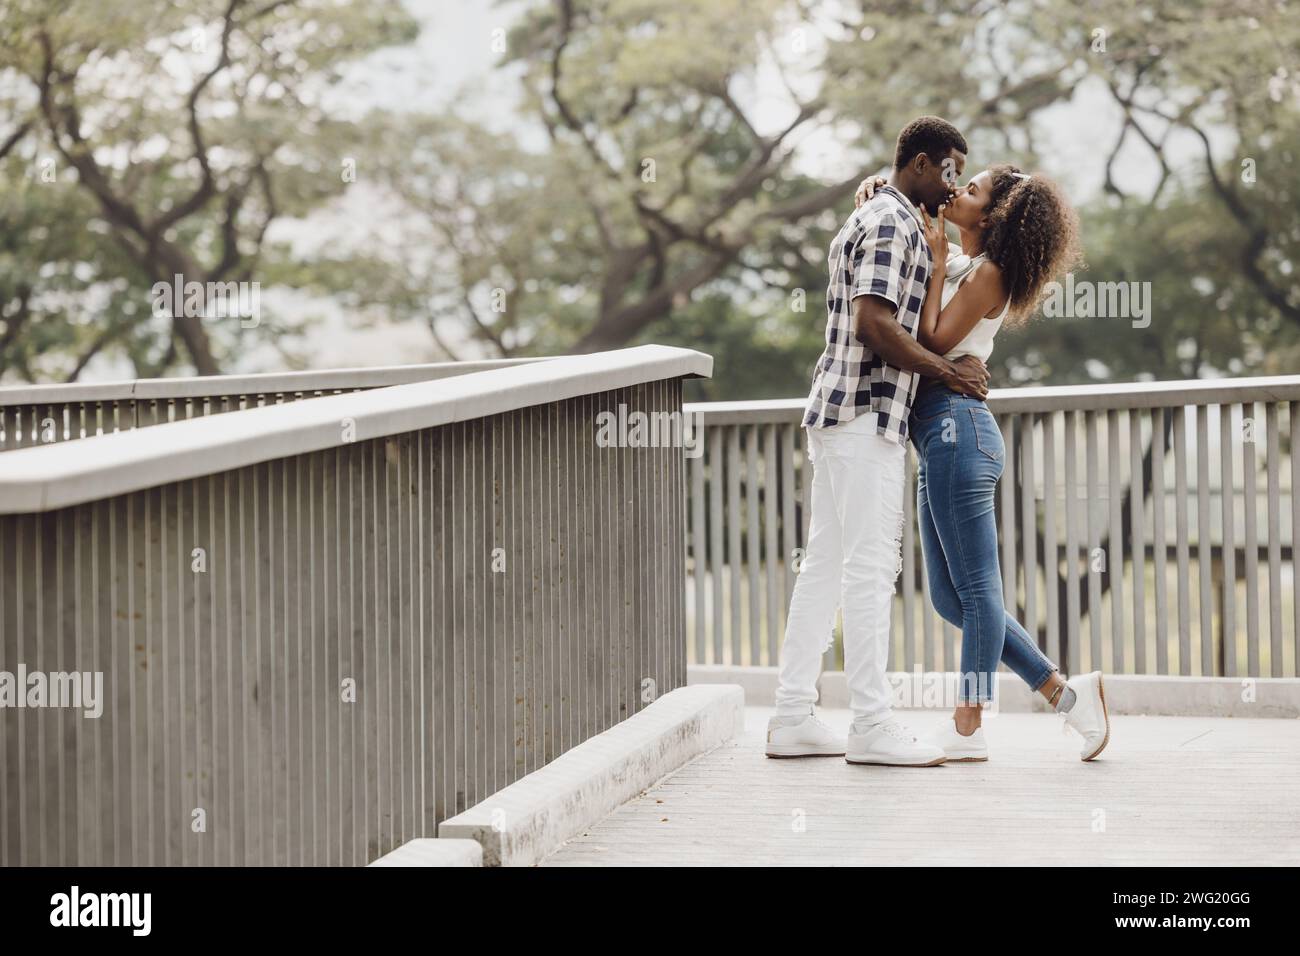 Date couple man and women valentine day. African black lover at park outdoors summer season vintage color tone Stock Photo